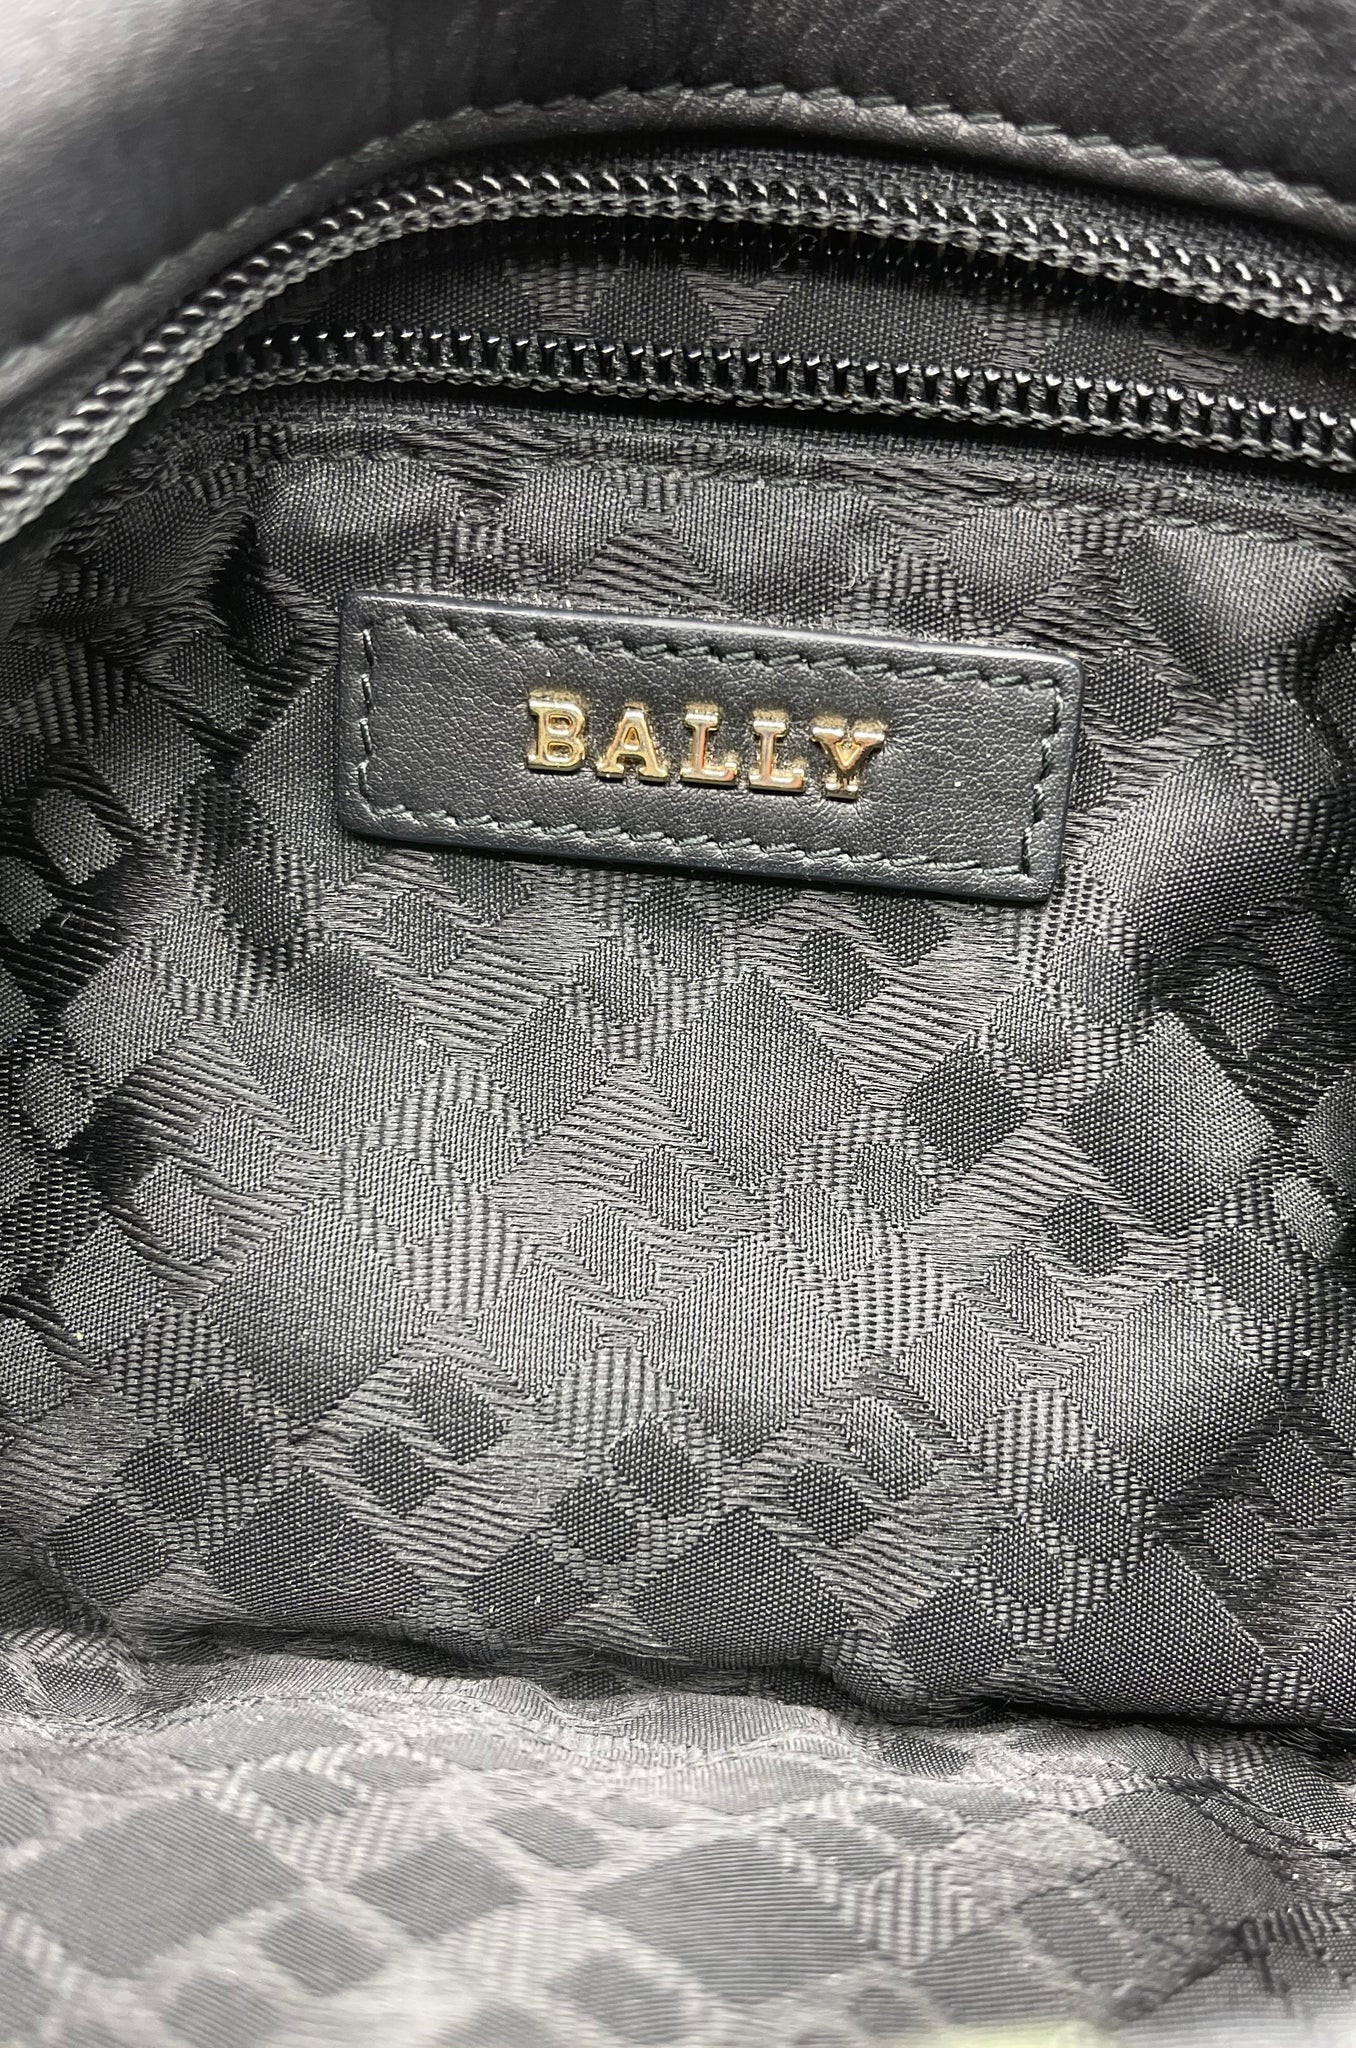 Bally Leather Quilted Floral Shoulder Bag INTERIOR 5 of 5